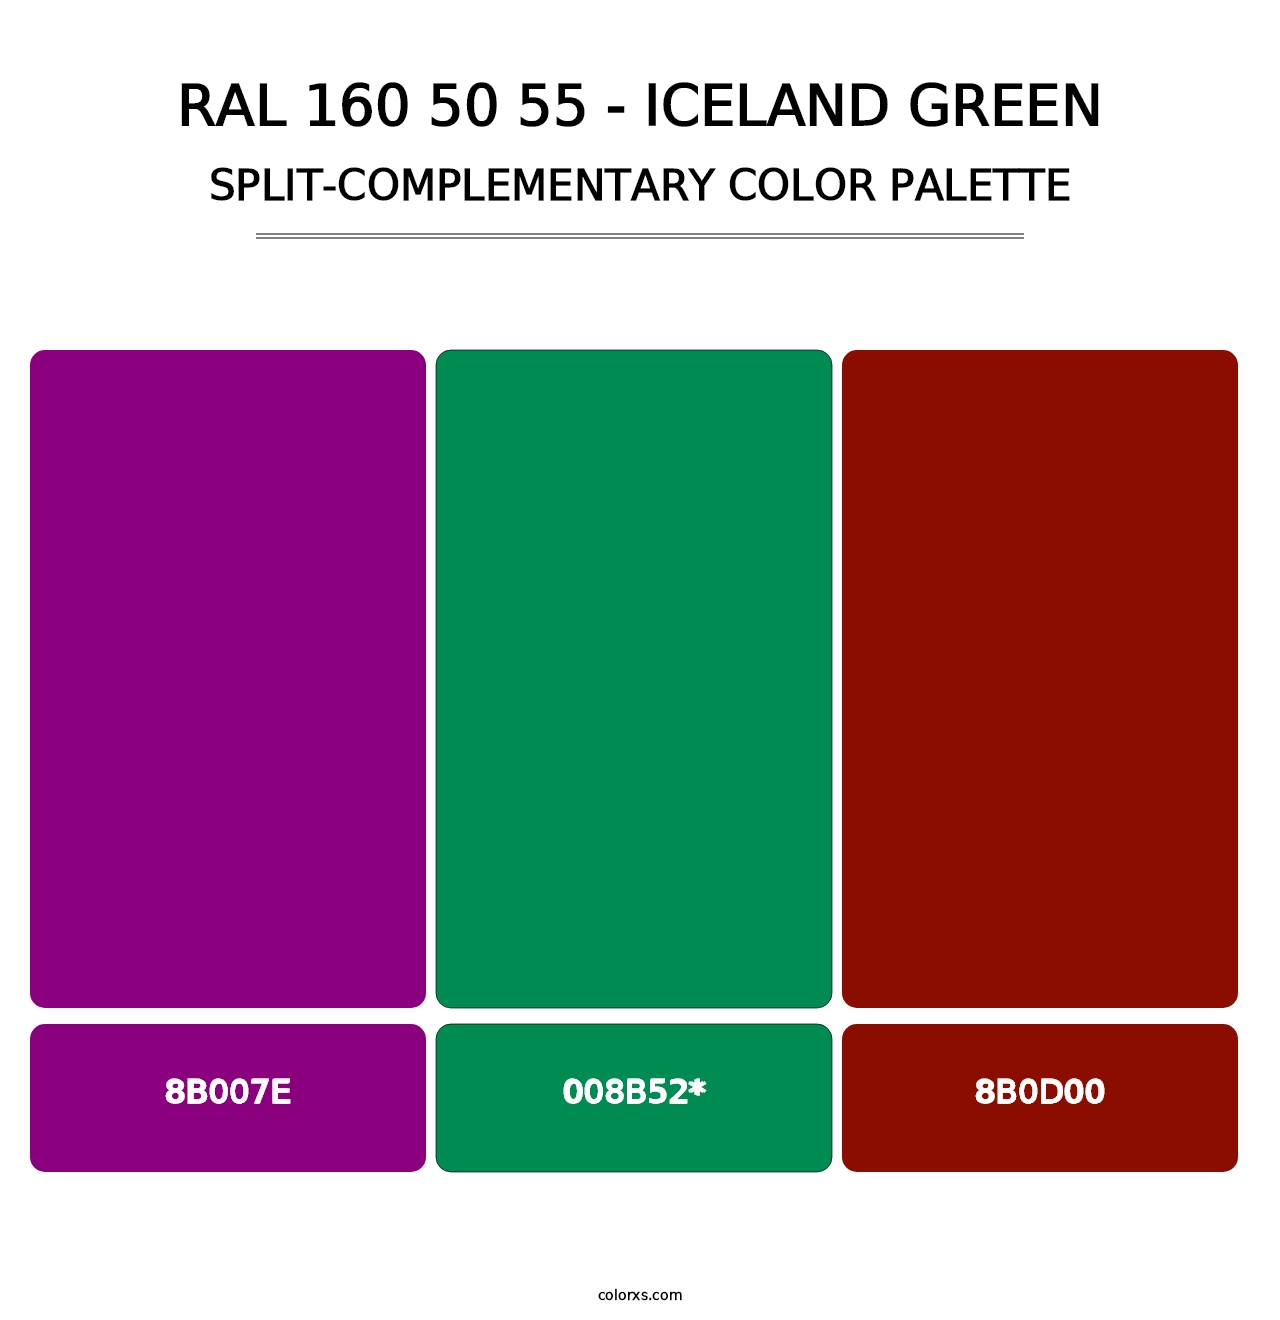 RAL 160 50 55 - Iceland Green - Split-Complementary Color Palette